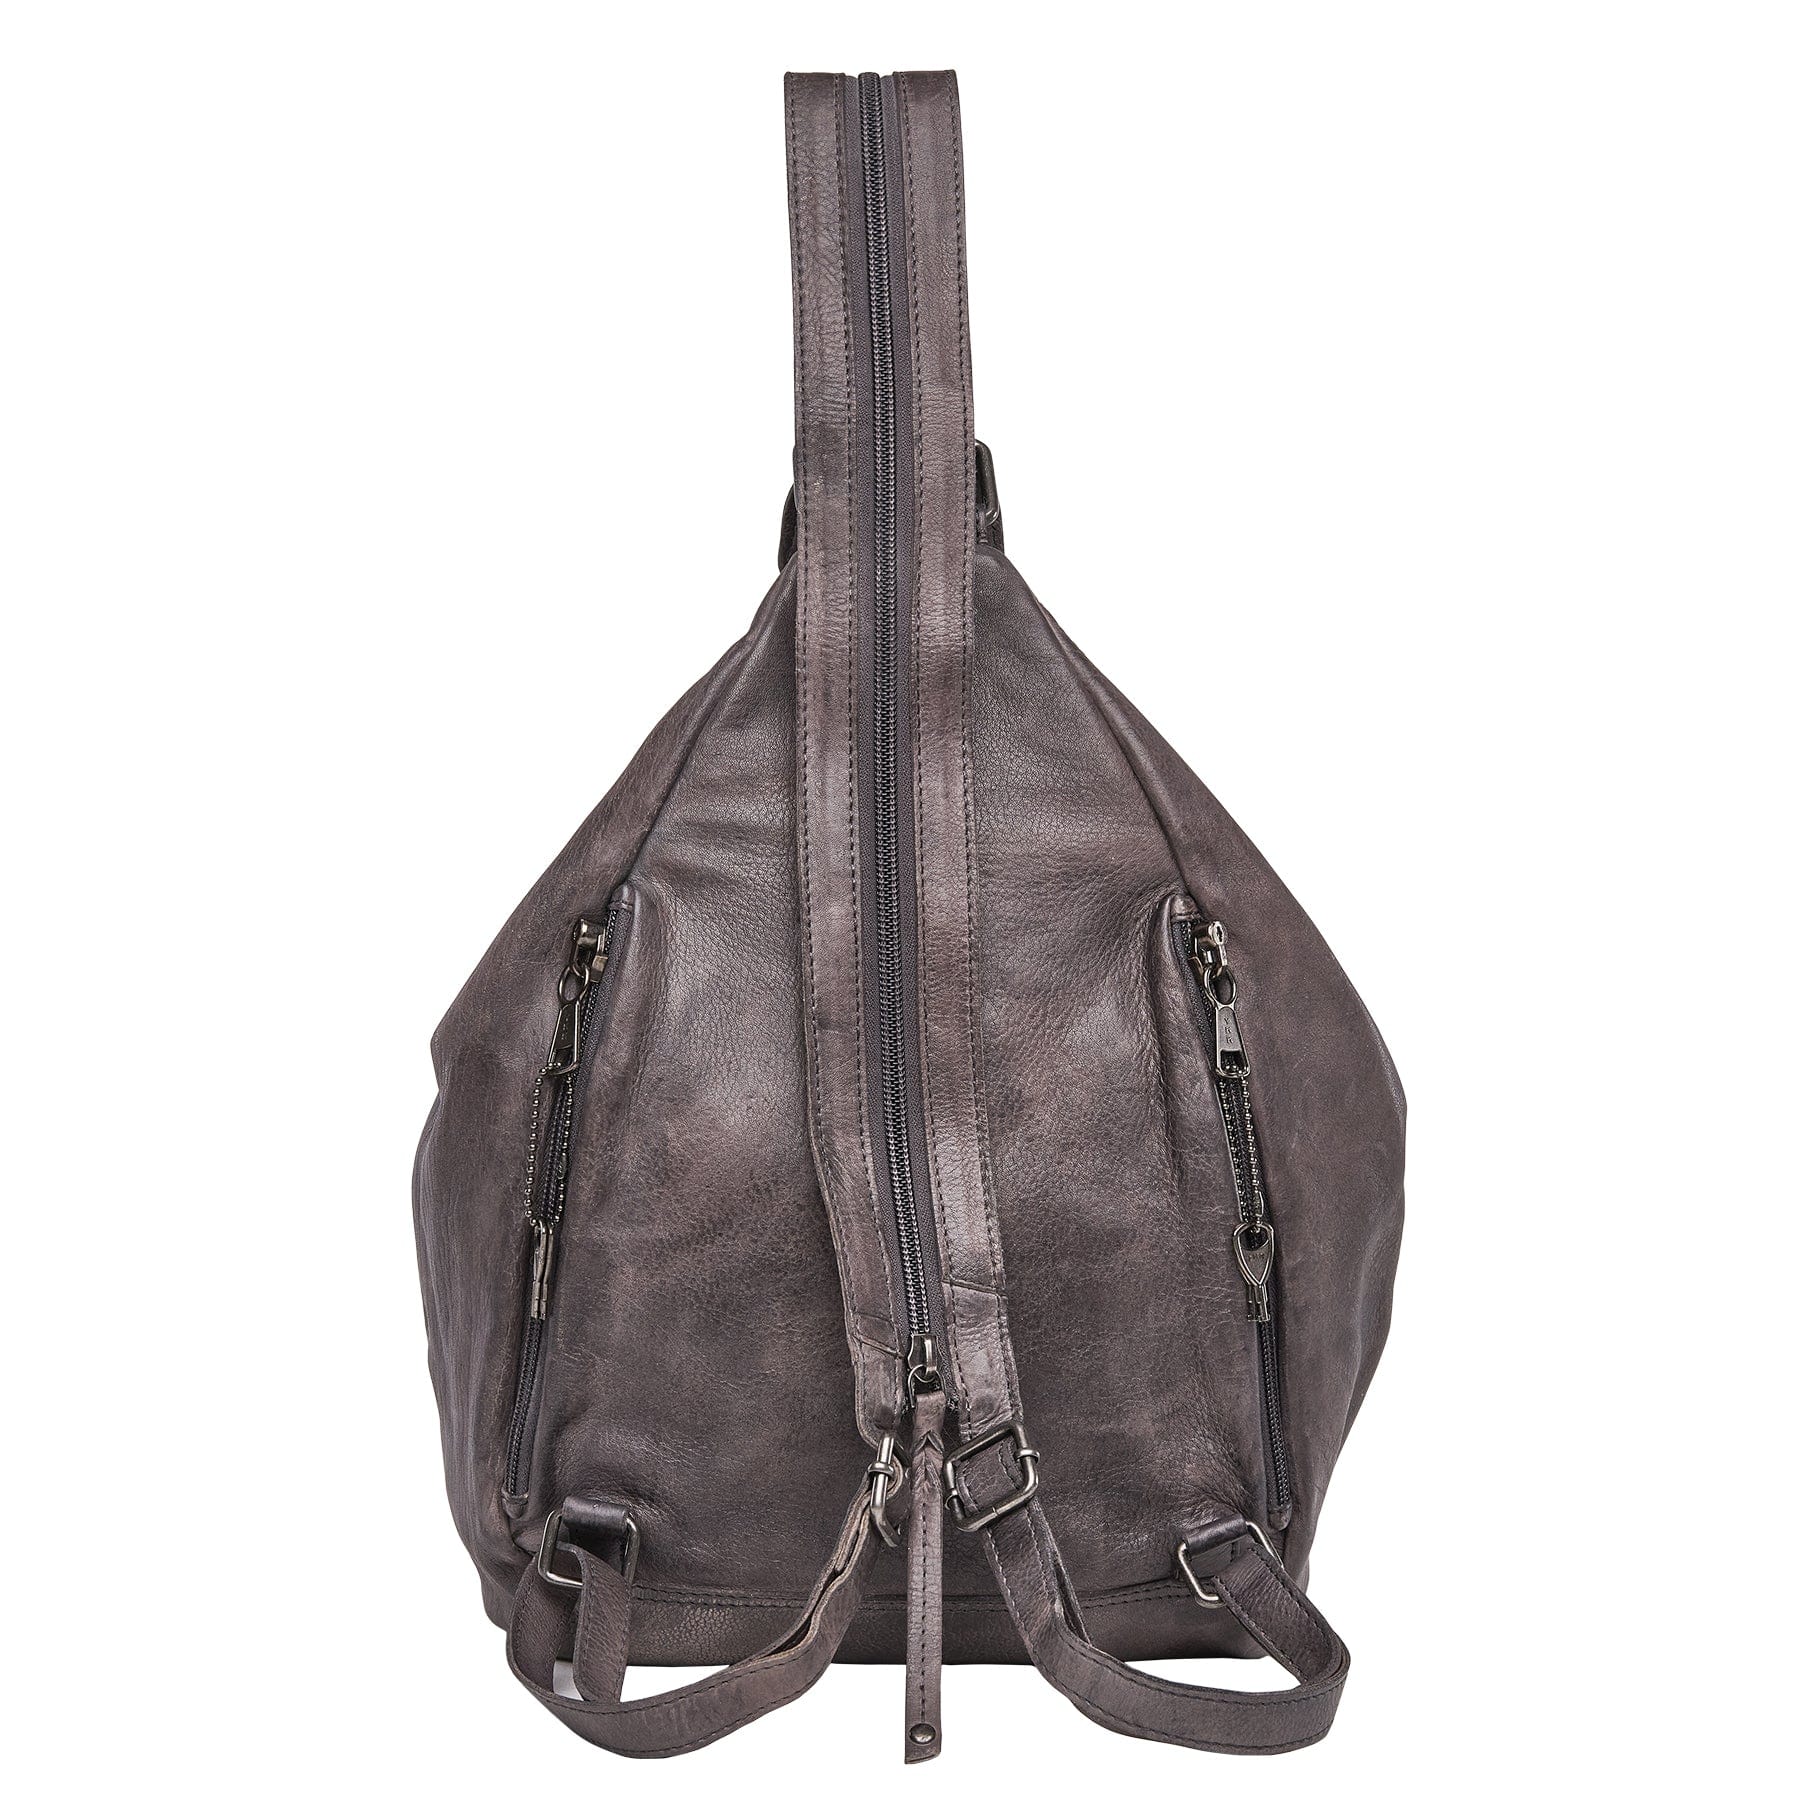 Concealed Carry Marley Unisex Backpack -  YKK Locking Zippers and Universal Holsters for Gun -  Outdoor Bag for Gun Owner -  Backpack for Conceal Carry -  best gun carry backpack -  Pistol and Firearm Bag -  Western Hide Backpack -  Boho Stylish Backpack for Women -  Universal Holster Bag -  Marley Unisex Backpack - Women's Concealed Carry Bagpack -  premium leather backpack 